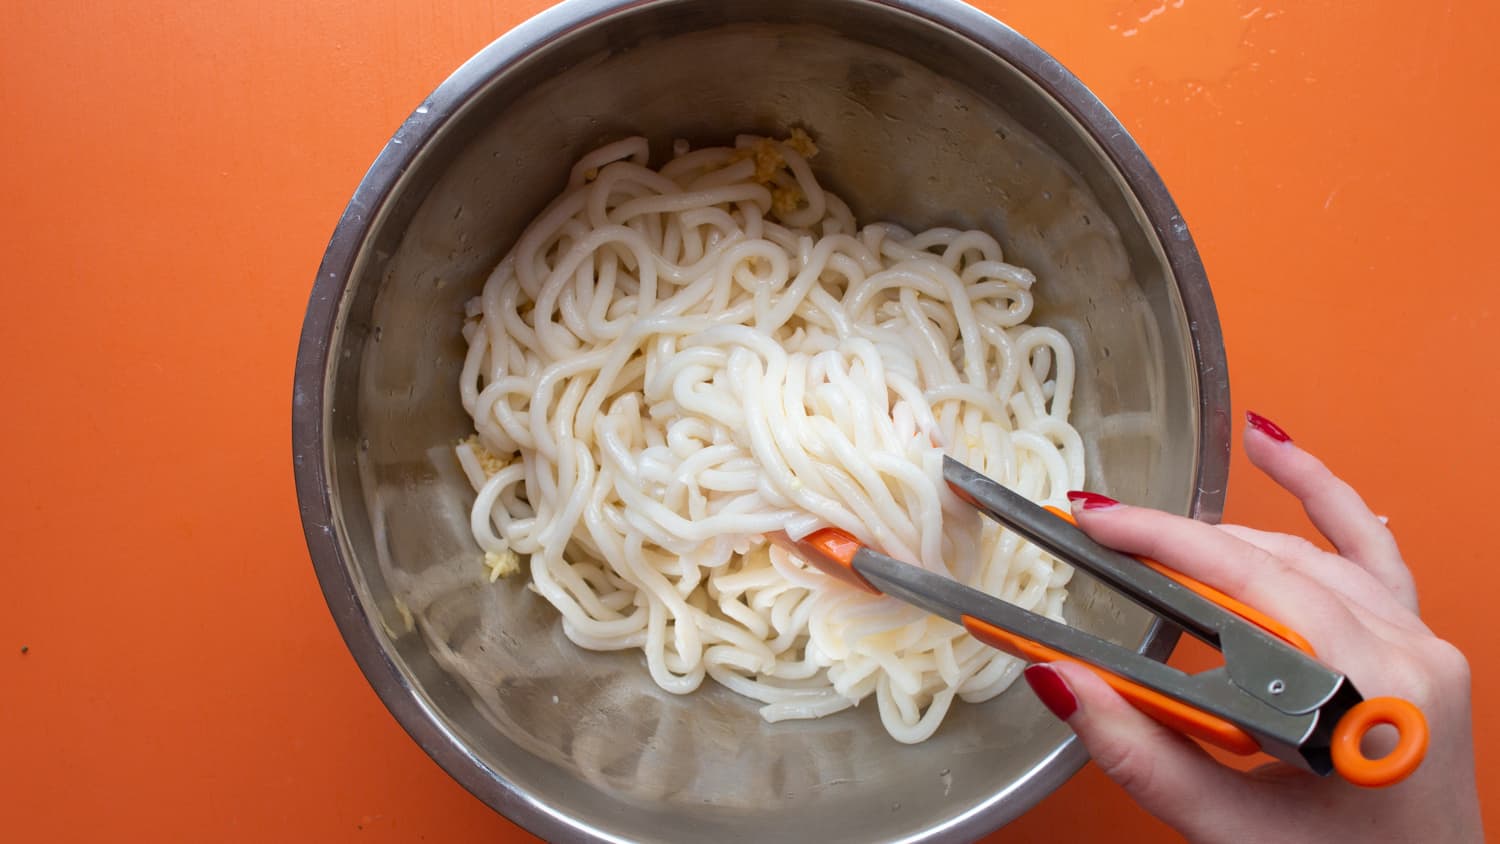 Noodles ready in metal pan with minced garlic and chilli oil being mixed with orange tongs on an orange background.